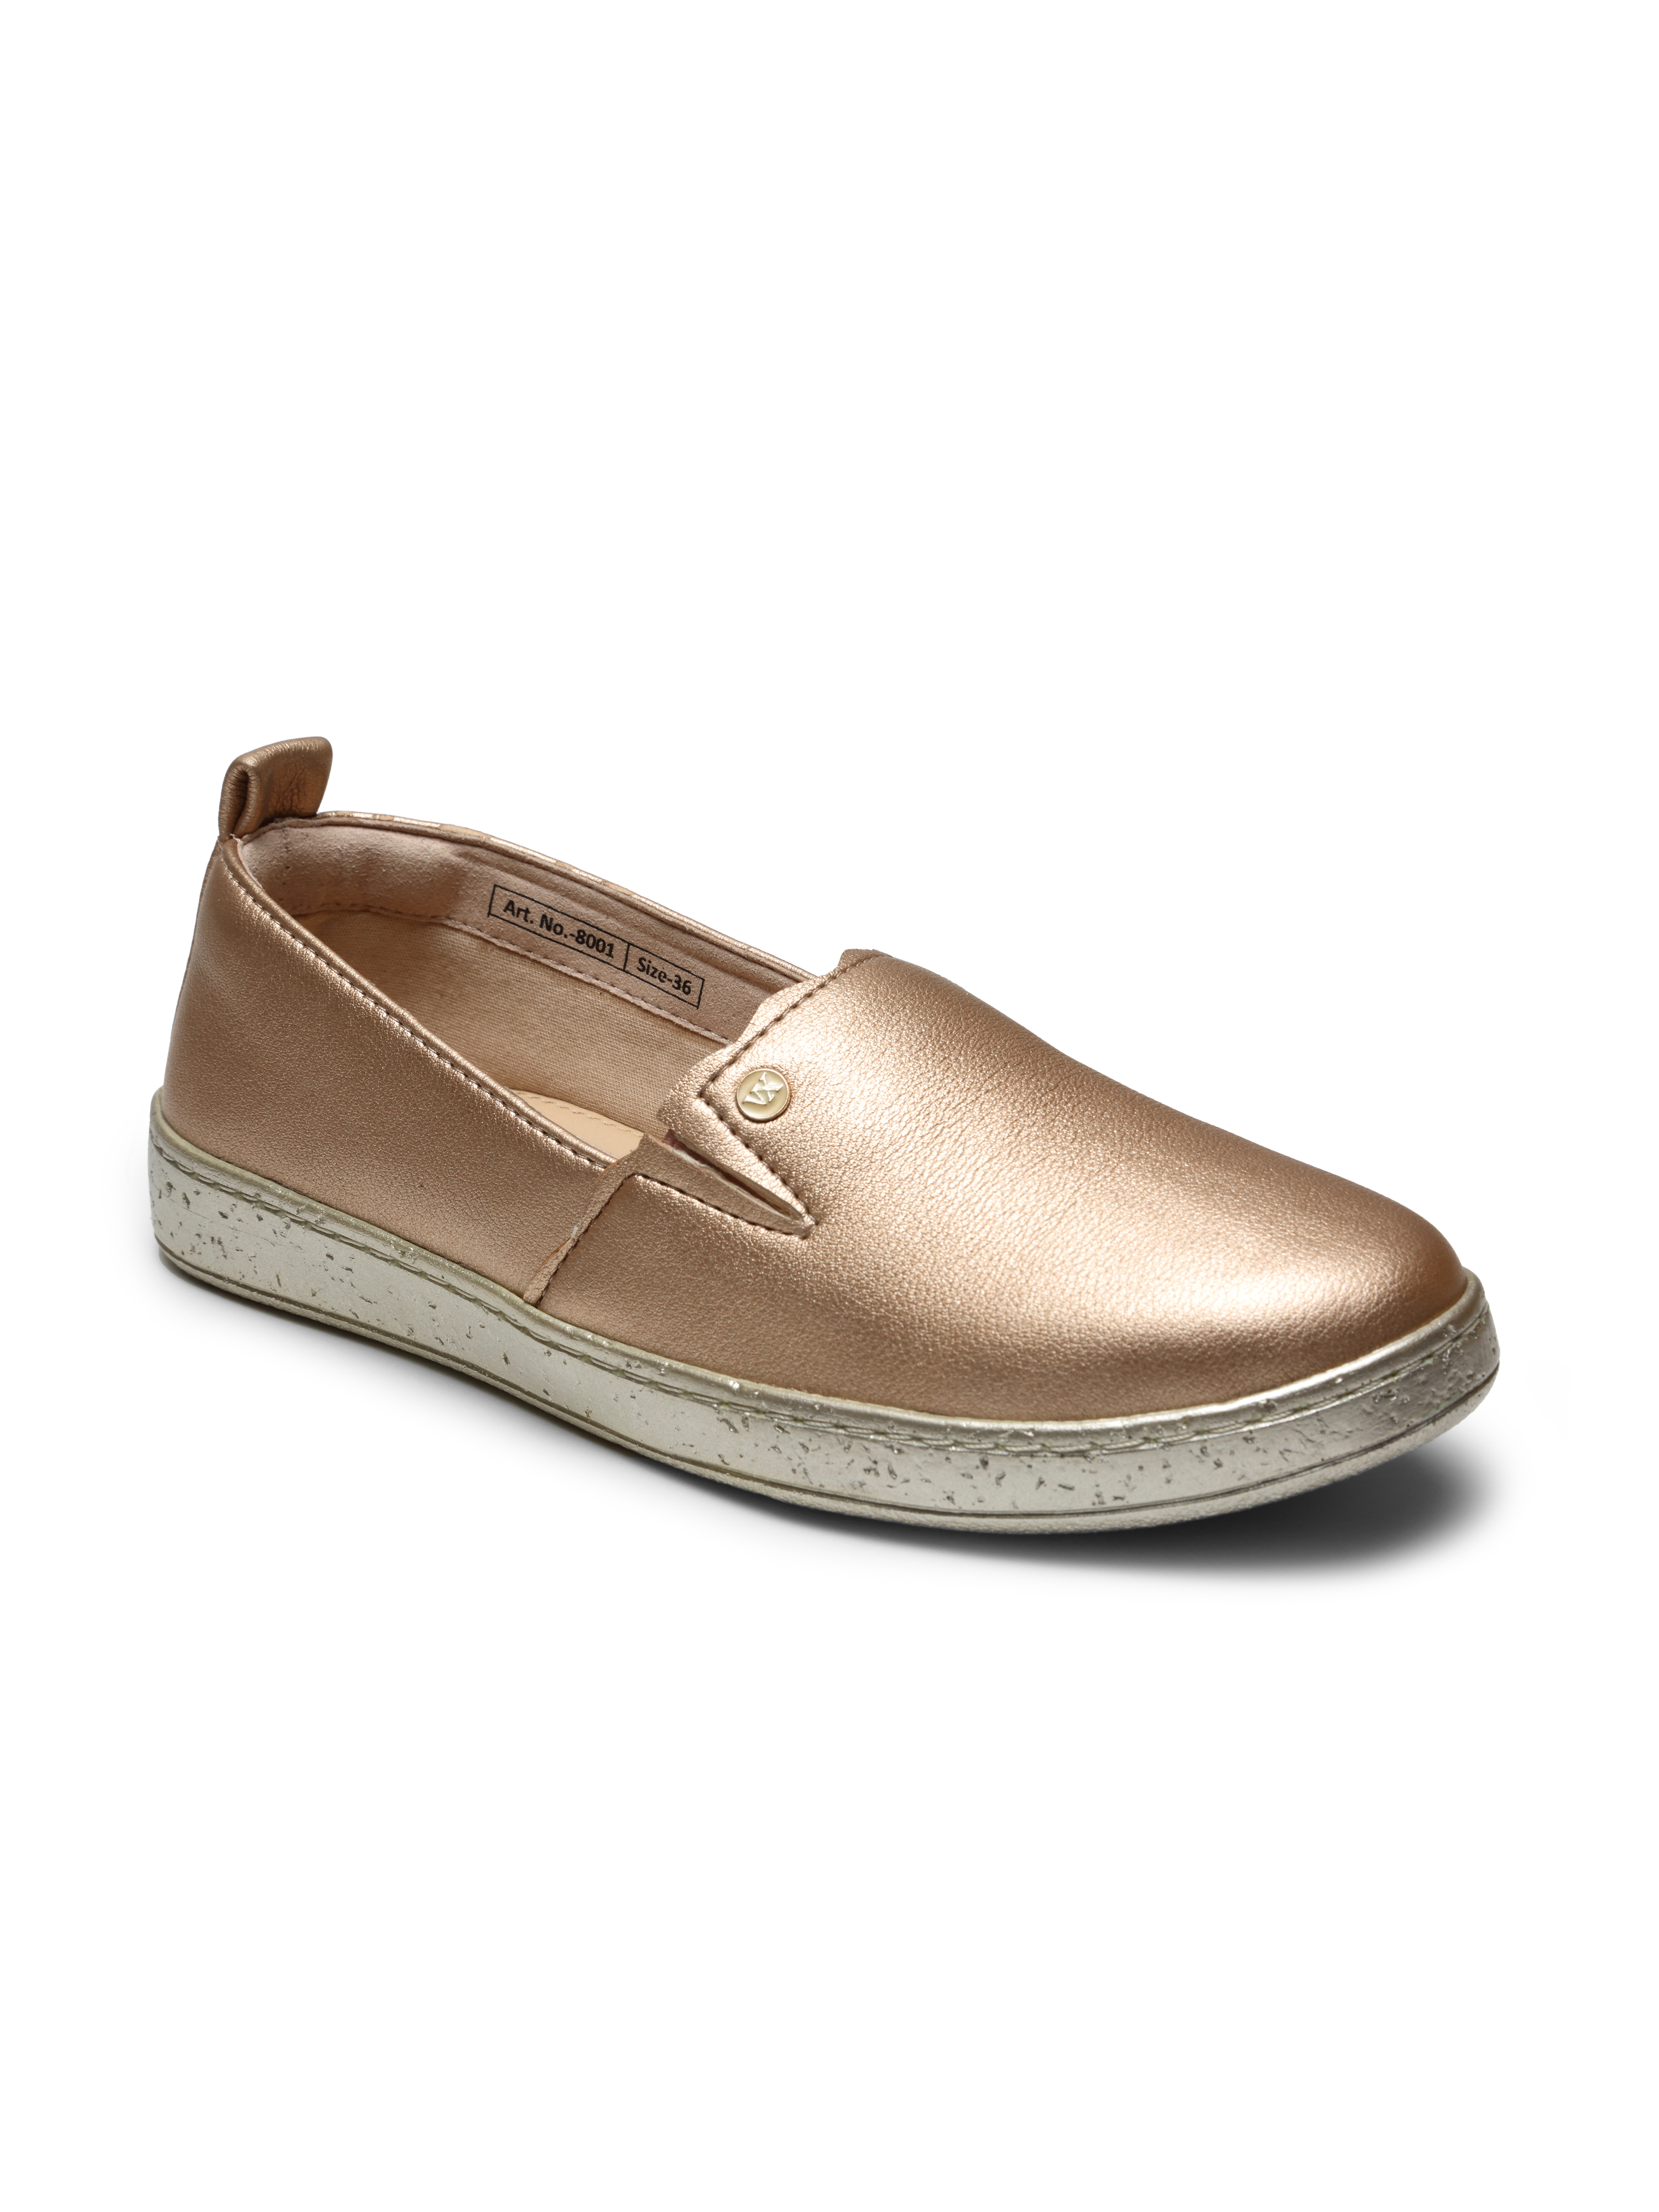 Buy Von Wellx Germany Comfort Women's Peach Casual Shoes Ida Online in Faridabad